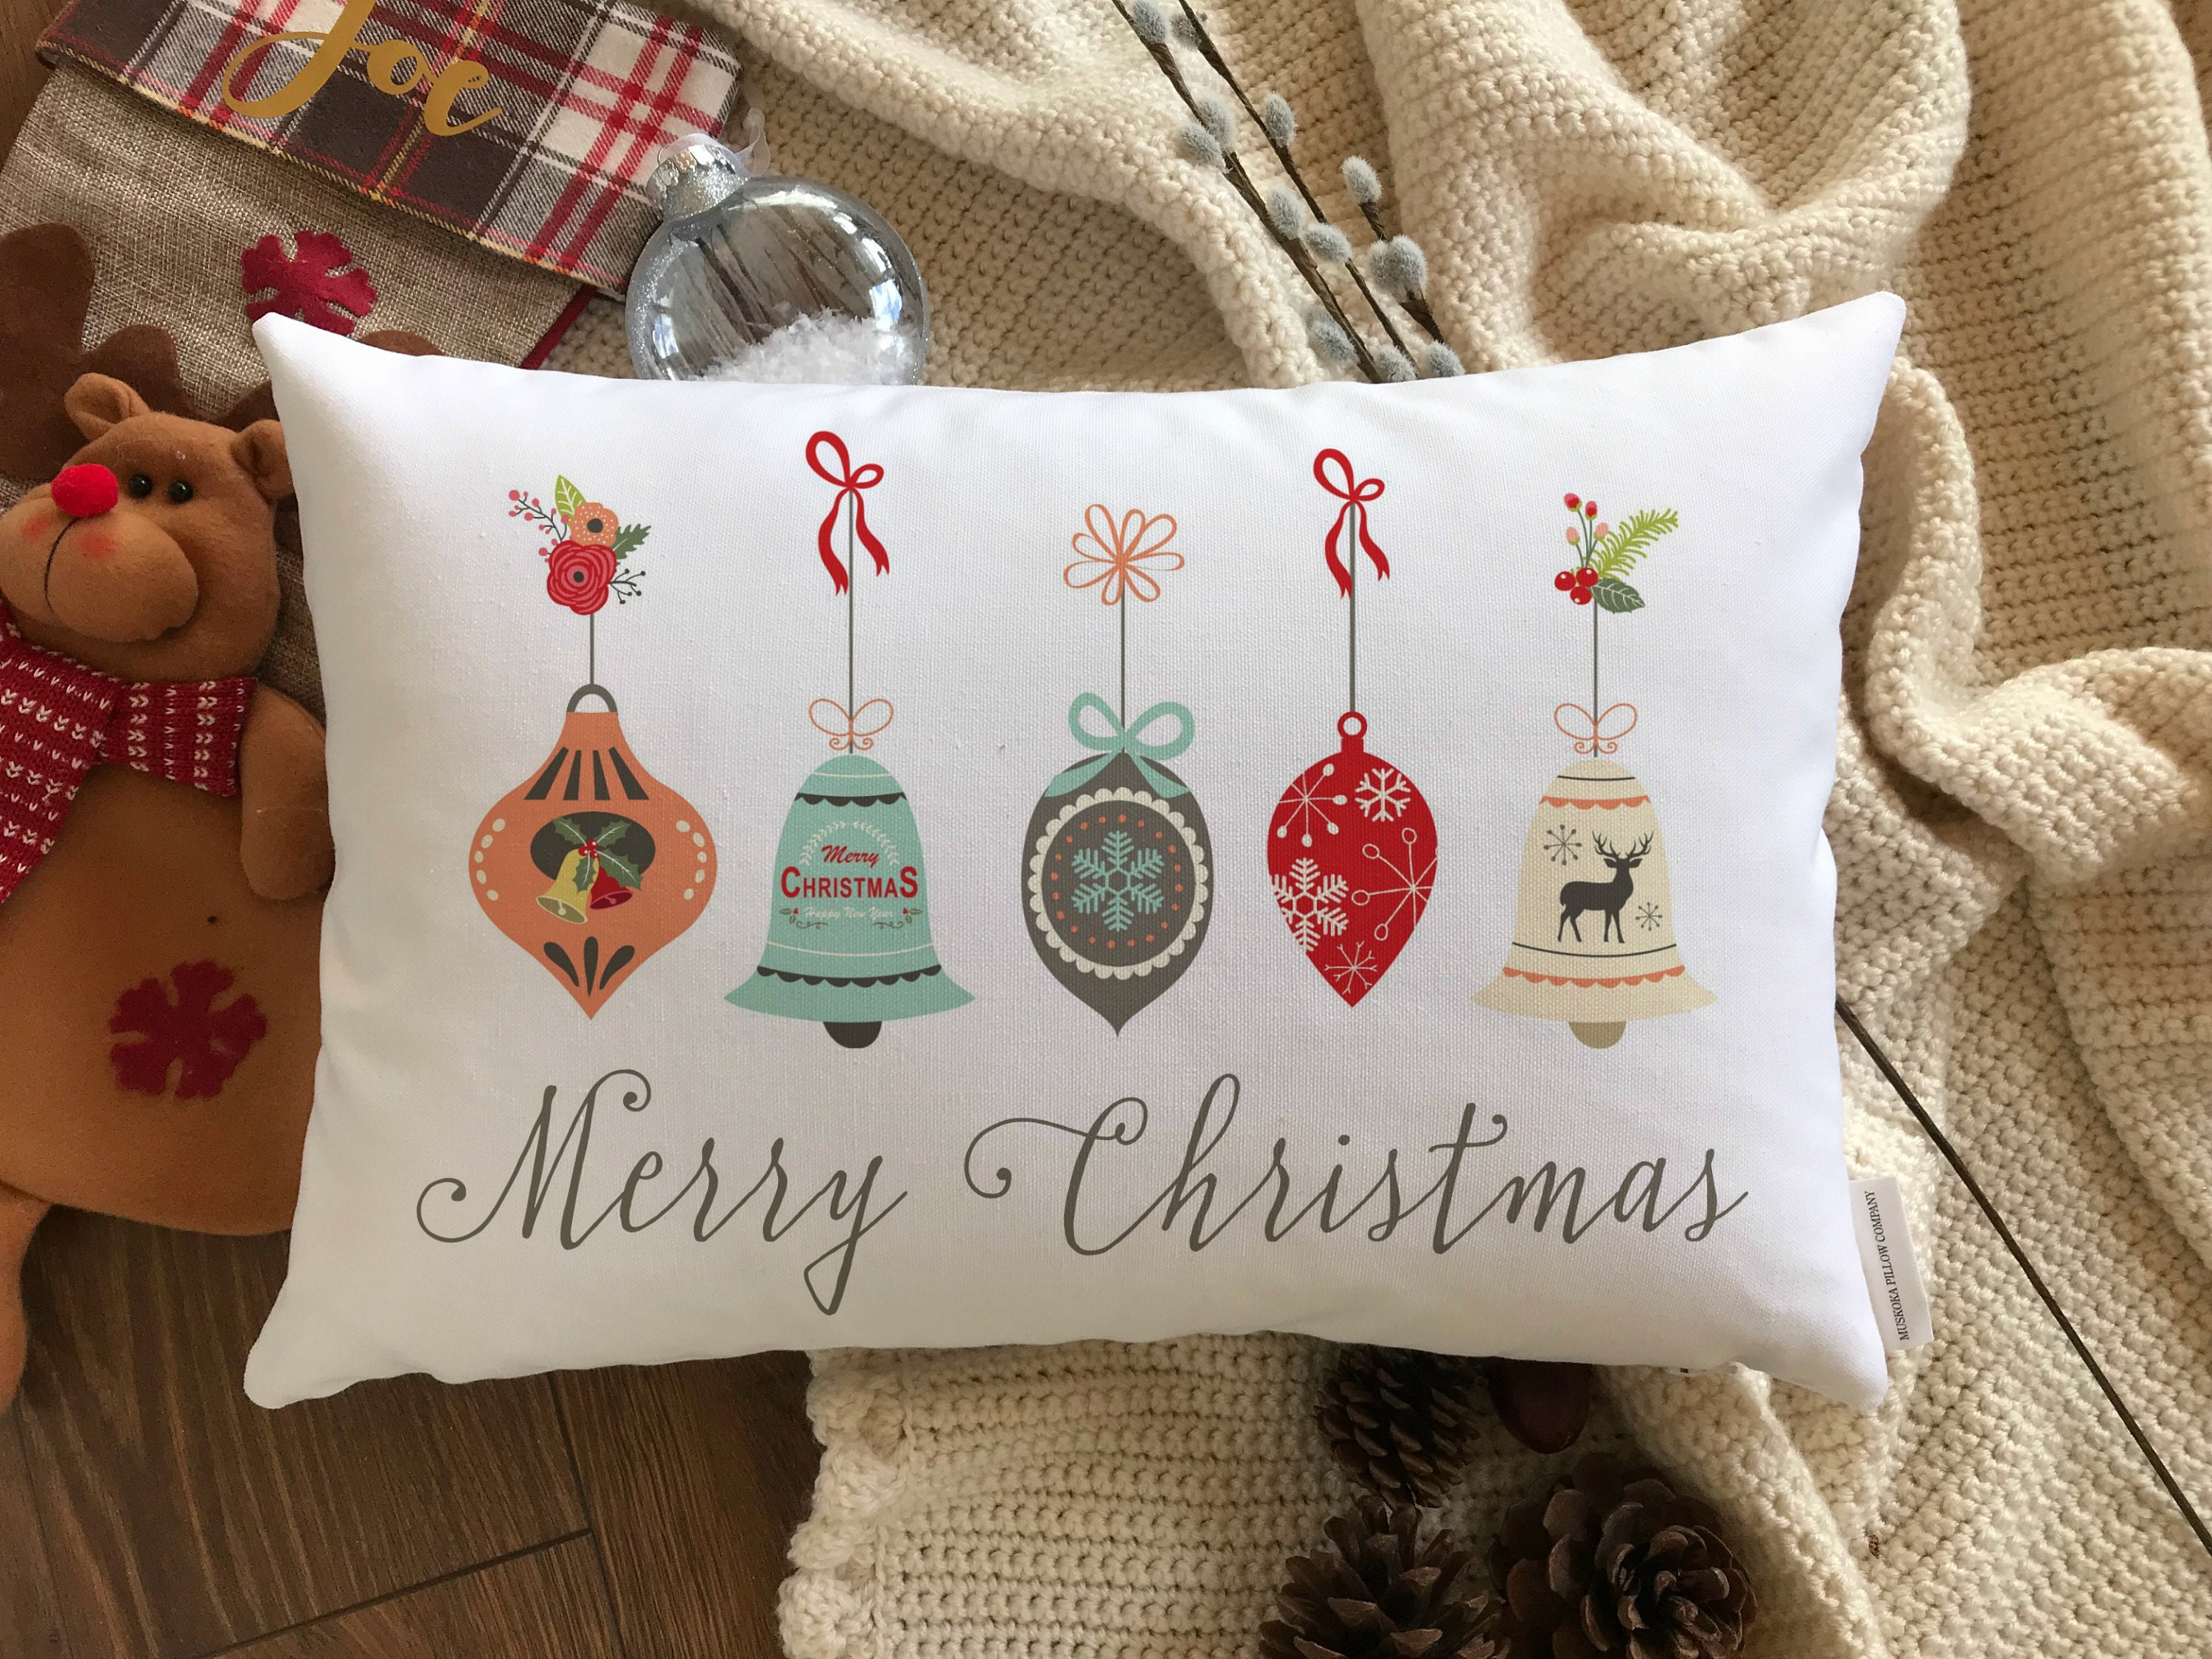 Watercolor Christmas Truck with Fresh Trees-Pillow Cover – Ivy